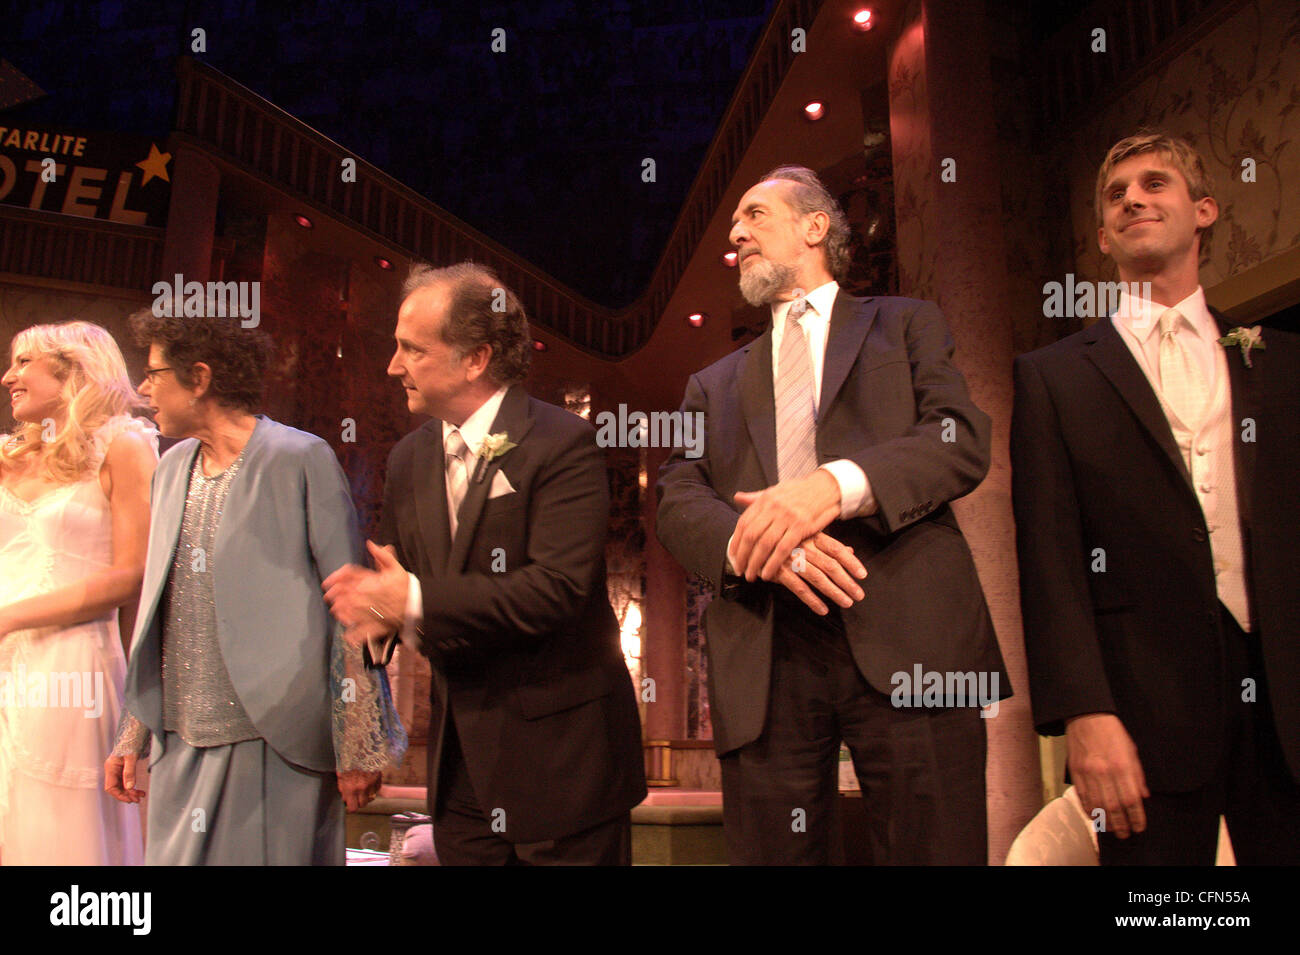 Ari Graynor, Julie Kavner, Mark Linn-Baker, Richard Libertini and Bill Army  Opening night of the Broadway production of 'Relatively Speaking' at the Brooks Atkinson Theatre - Curtain Call  New York City, USA - 20.10.11 Stock Photo